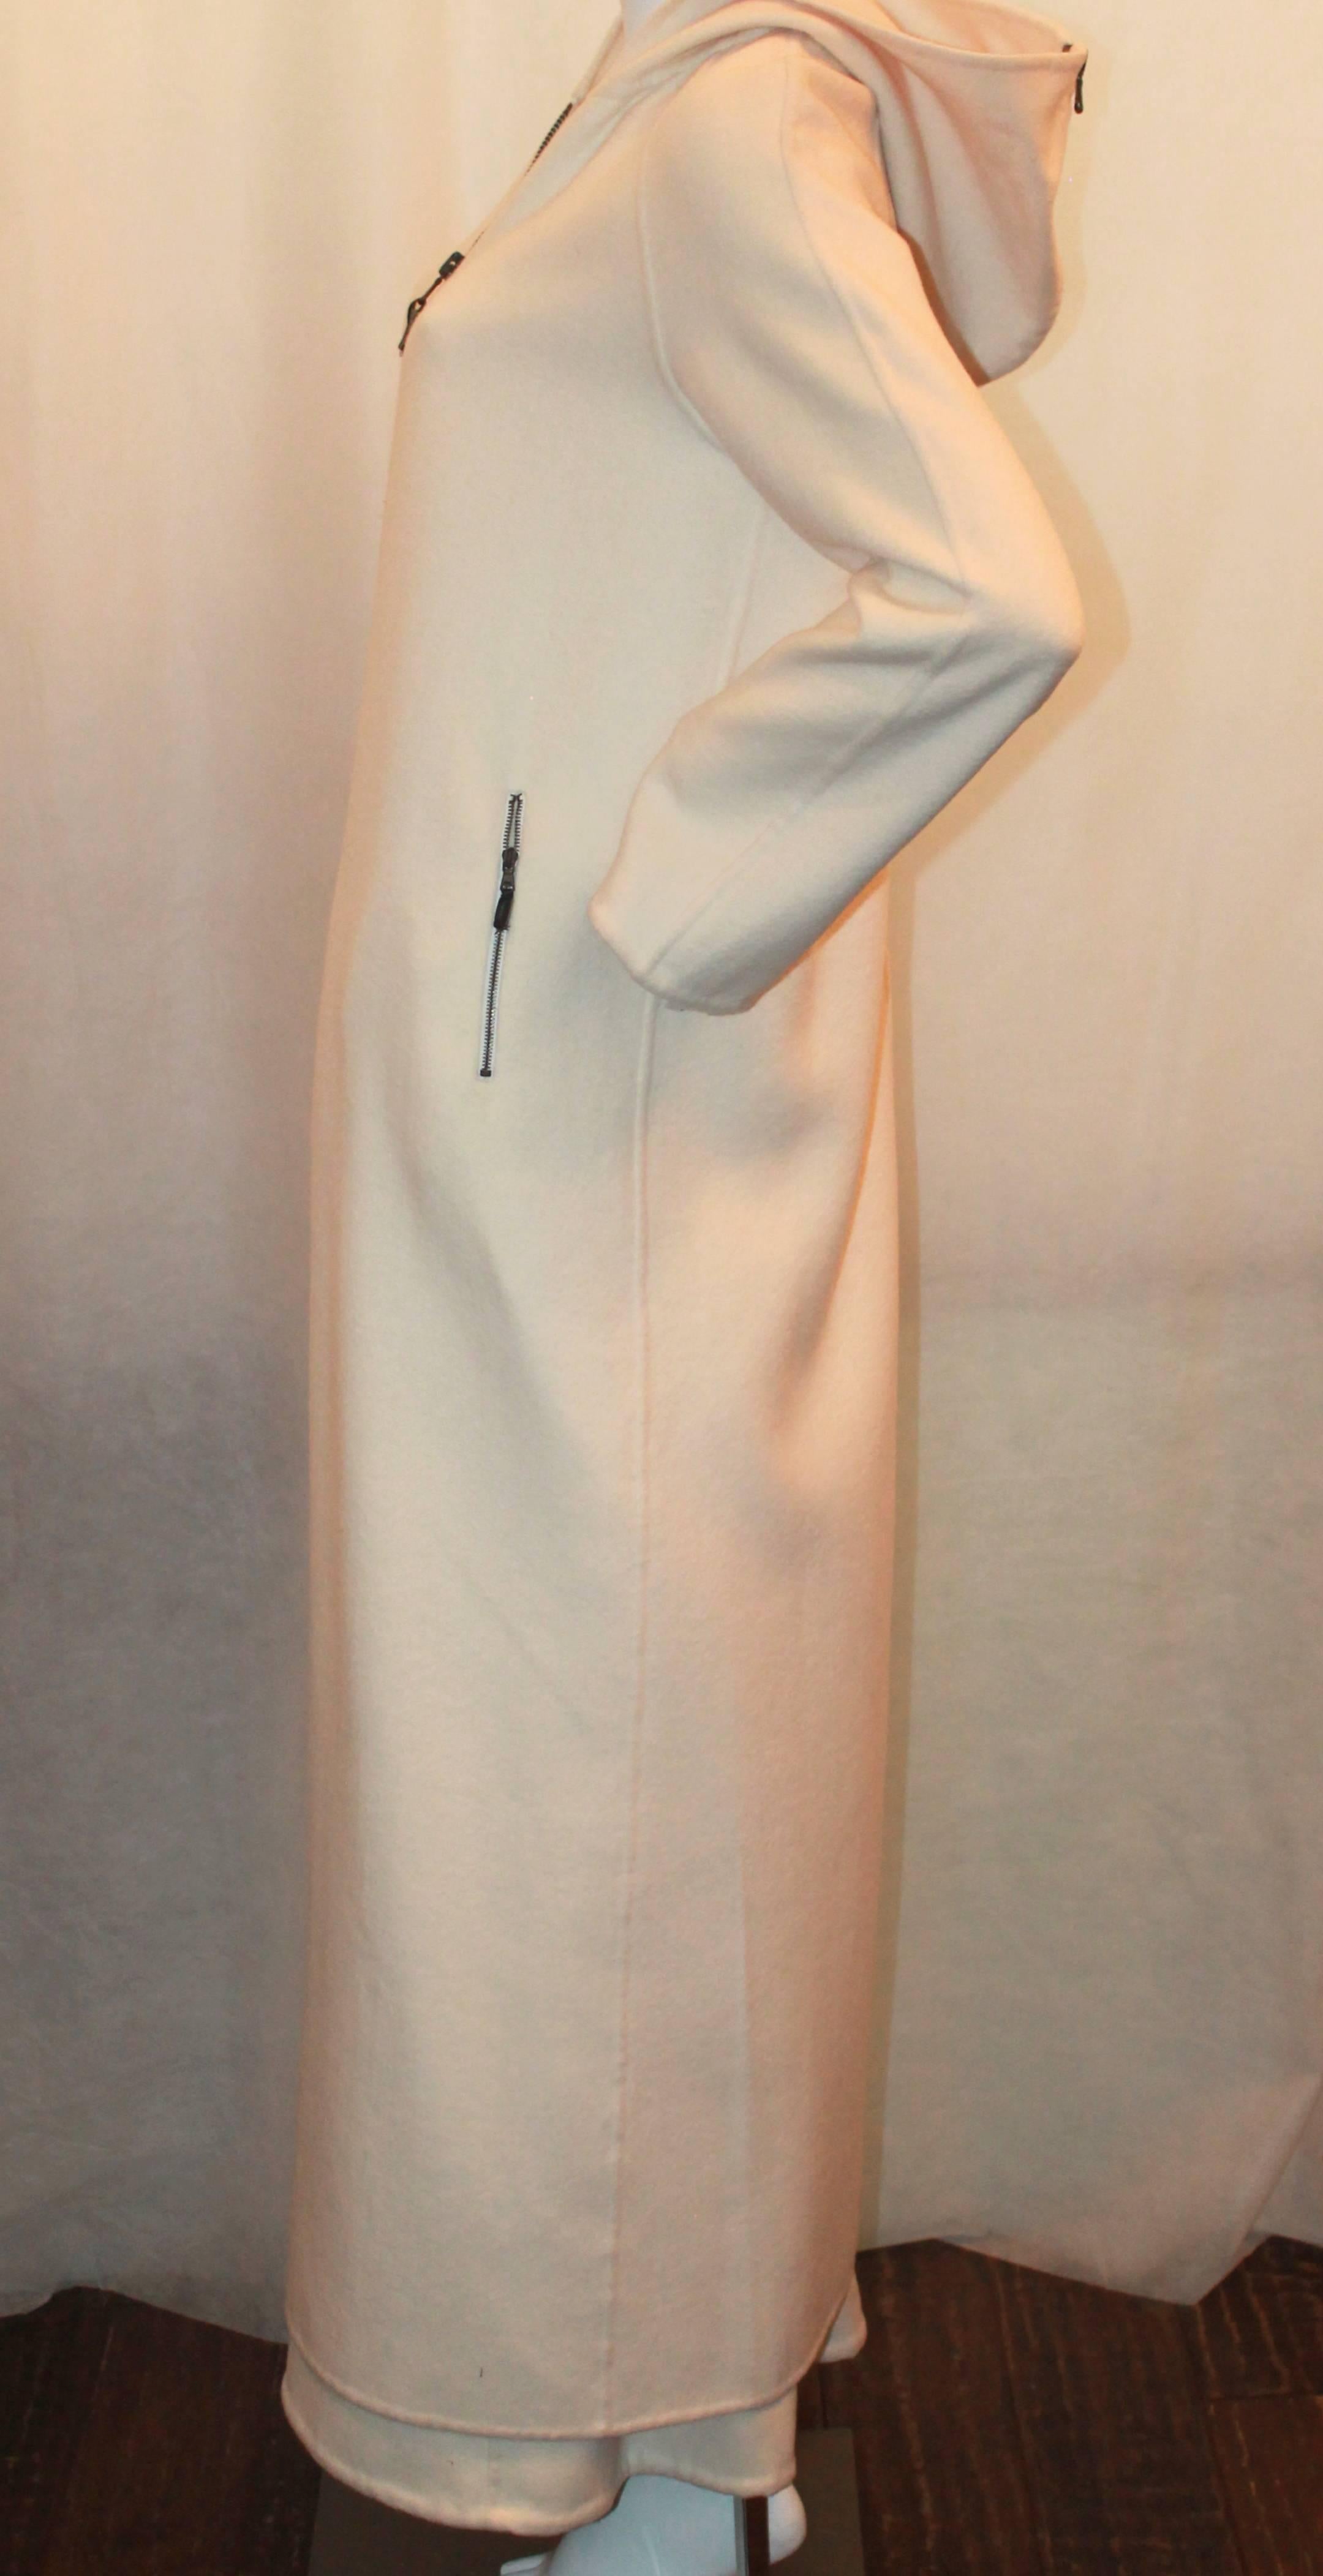 Michael Kors 1990's Vintage Ivory Cashmere Coat & Maxi Skirt Set - L. These one-of-a-kind pieces are in excellent vintage condition. The full length coat has a matching full length skirt. There are 2 front zip pockets on both the coat & the skirt